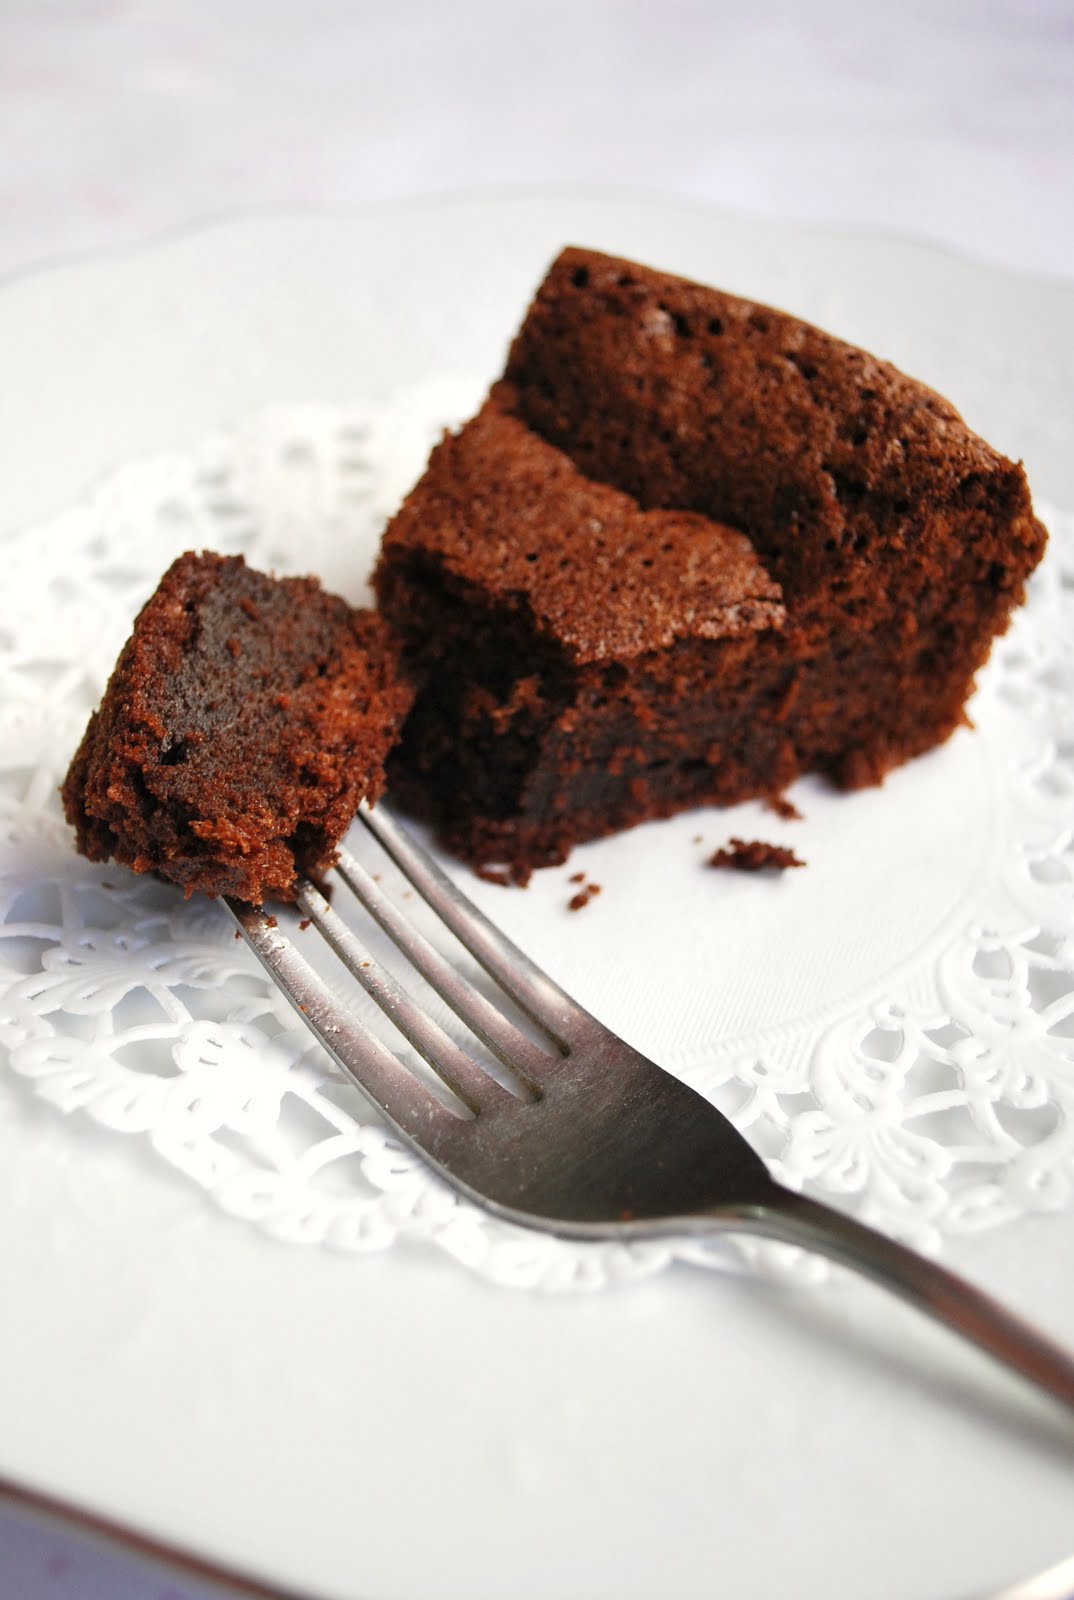 Sweets and Loves: Chocolate Torte Souffle - Going Flourless